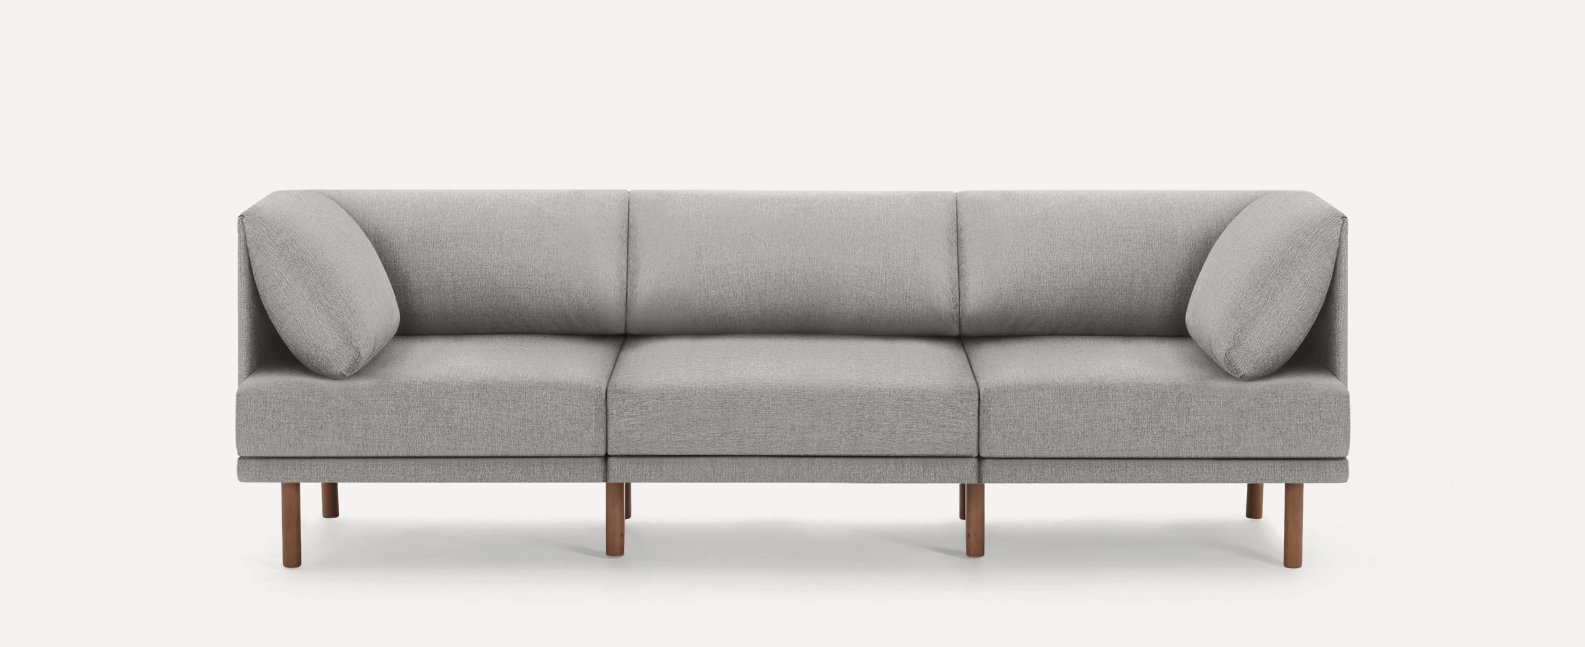 The Best Sofa - a luxurious and comfortable seating option for any living room